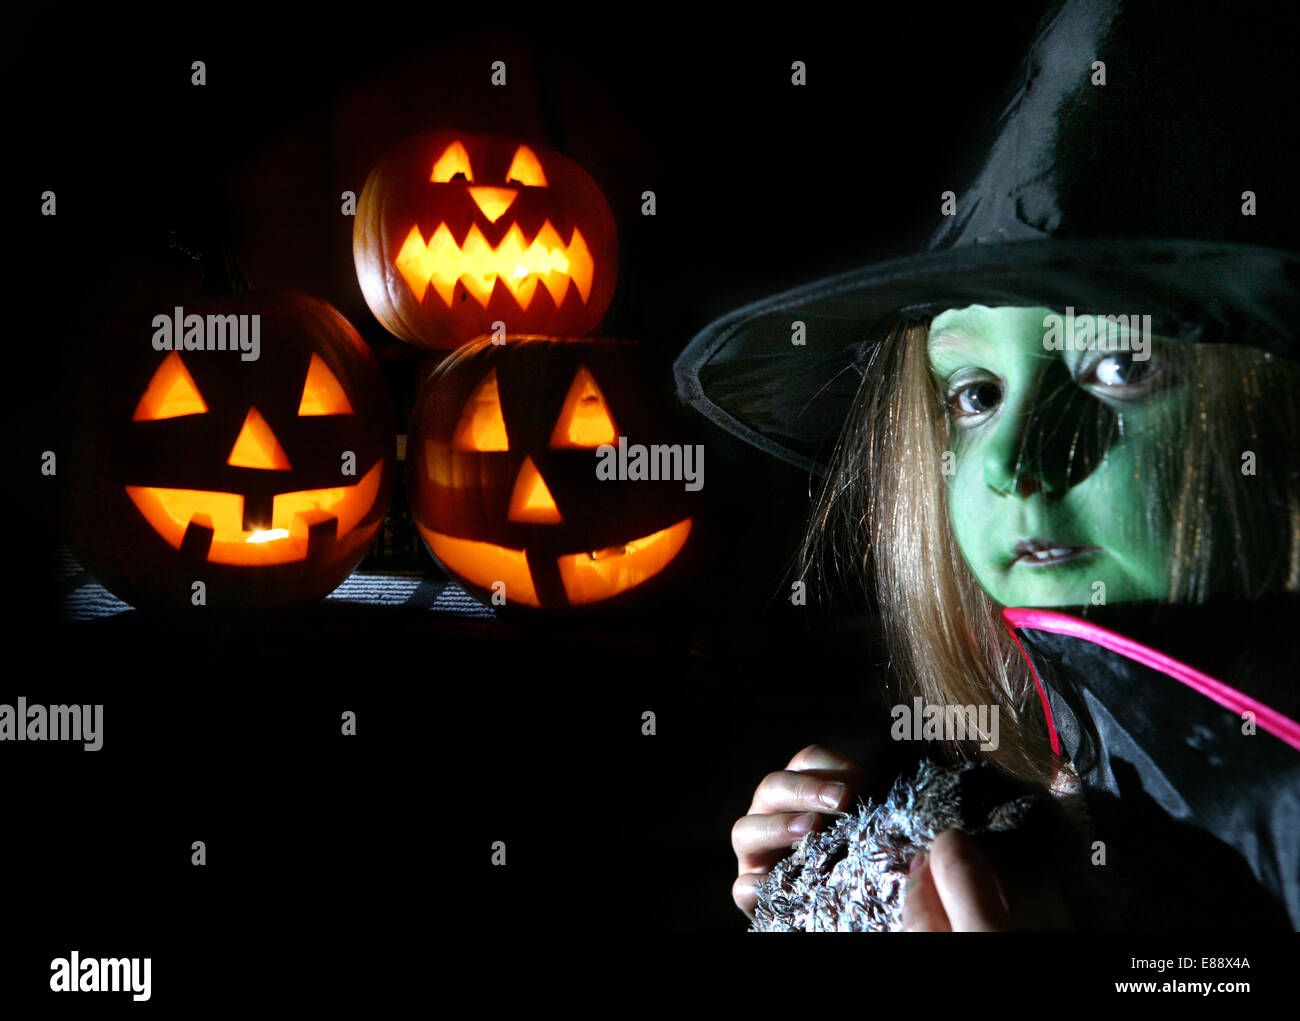 A girl in a witch costume poses in front of a collection of Halloween pumpkins Stock Photo